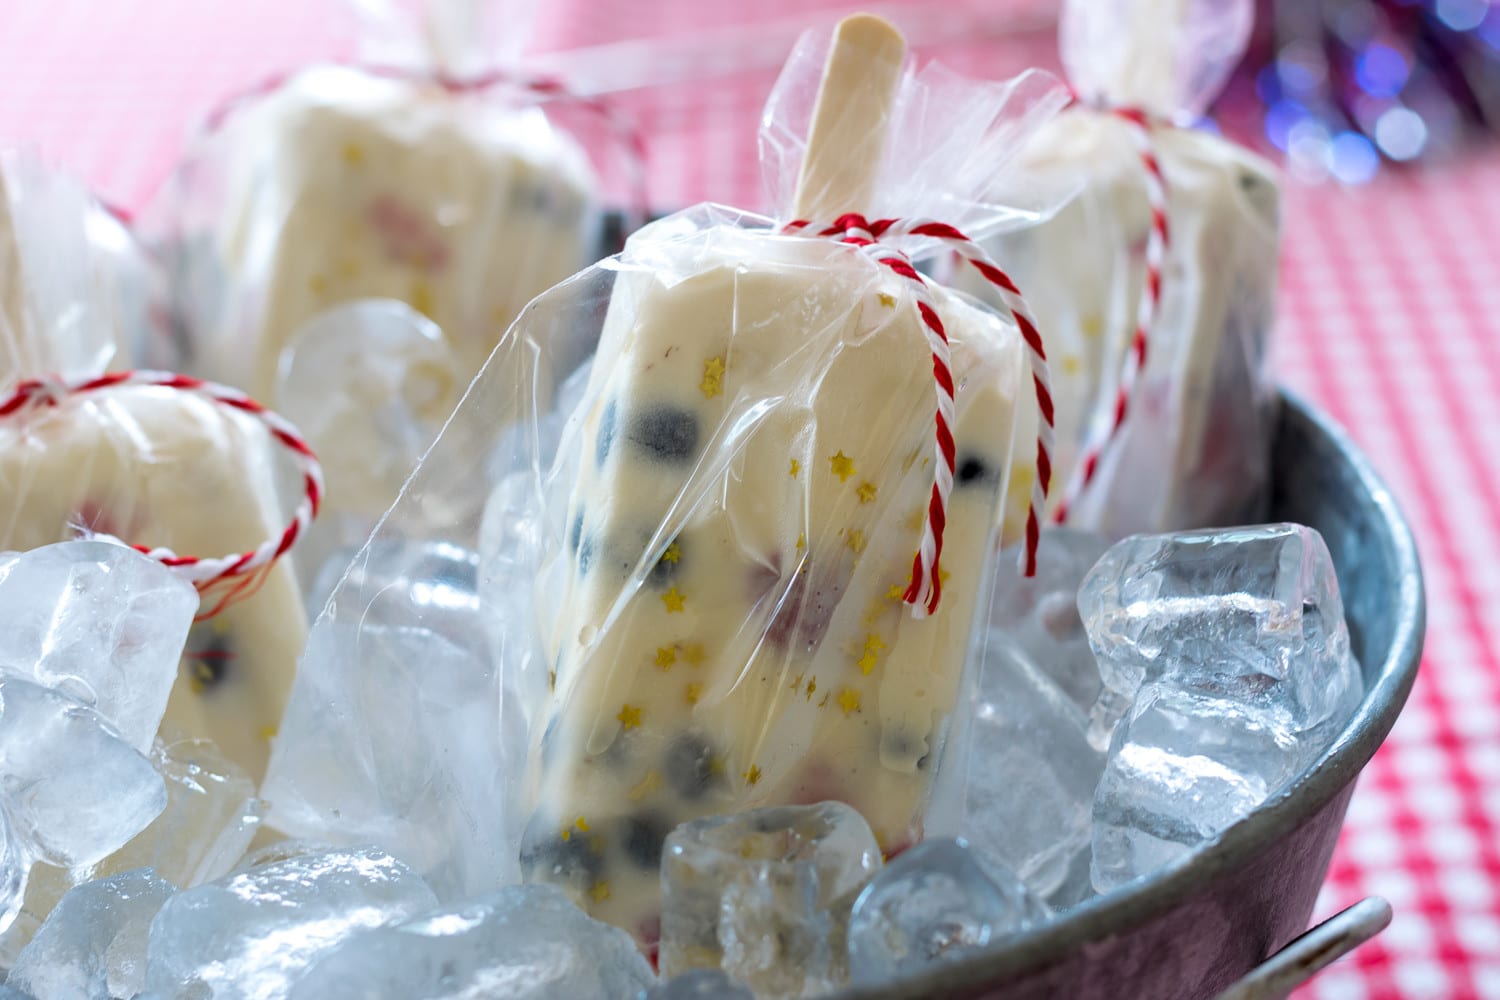 EASY to make red, white and blue ice cream popsicles are perfect for your Fourth of July festivities. Vanilla ice cream, chopped fresh strawberries and fresh blueberries make a perfect ice cream popsicle, made even more perfect with edible gold star sprinkles to up the 4th of July fun.